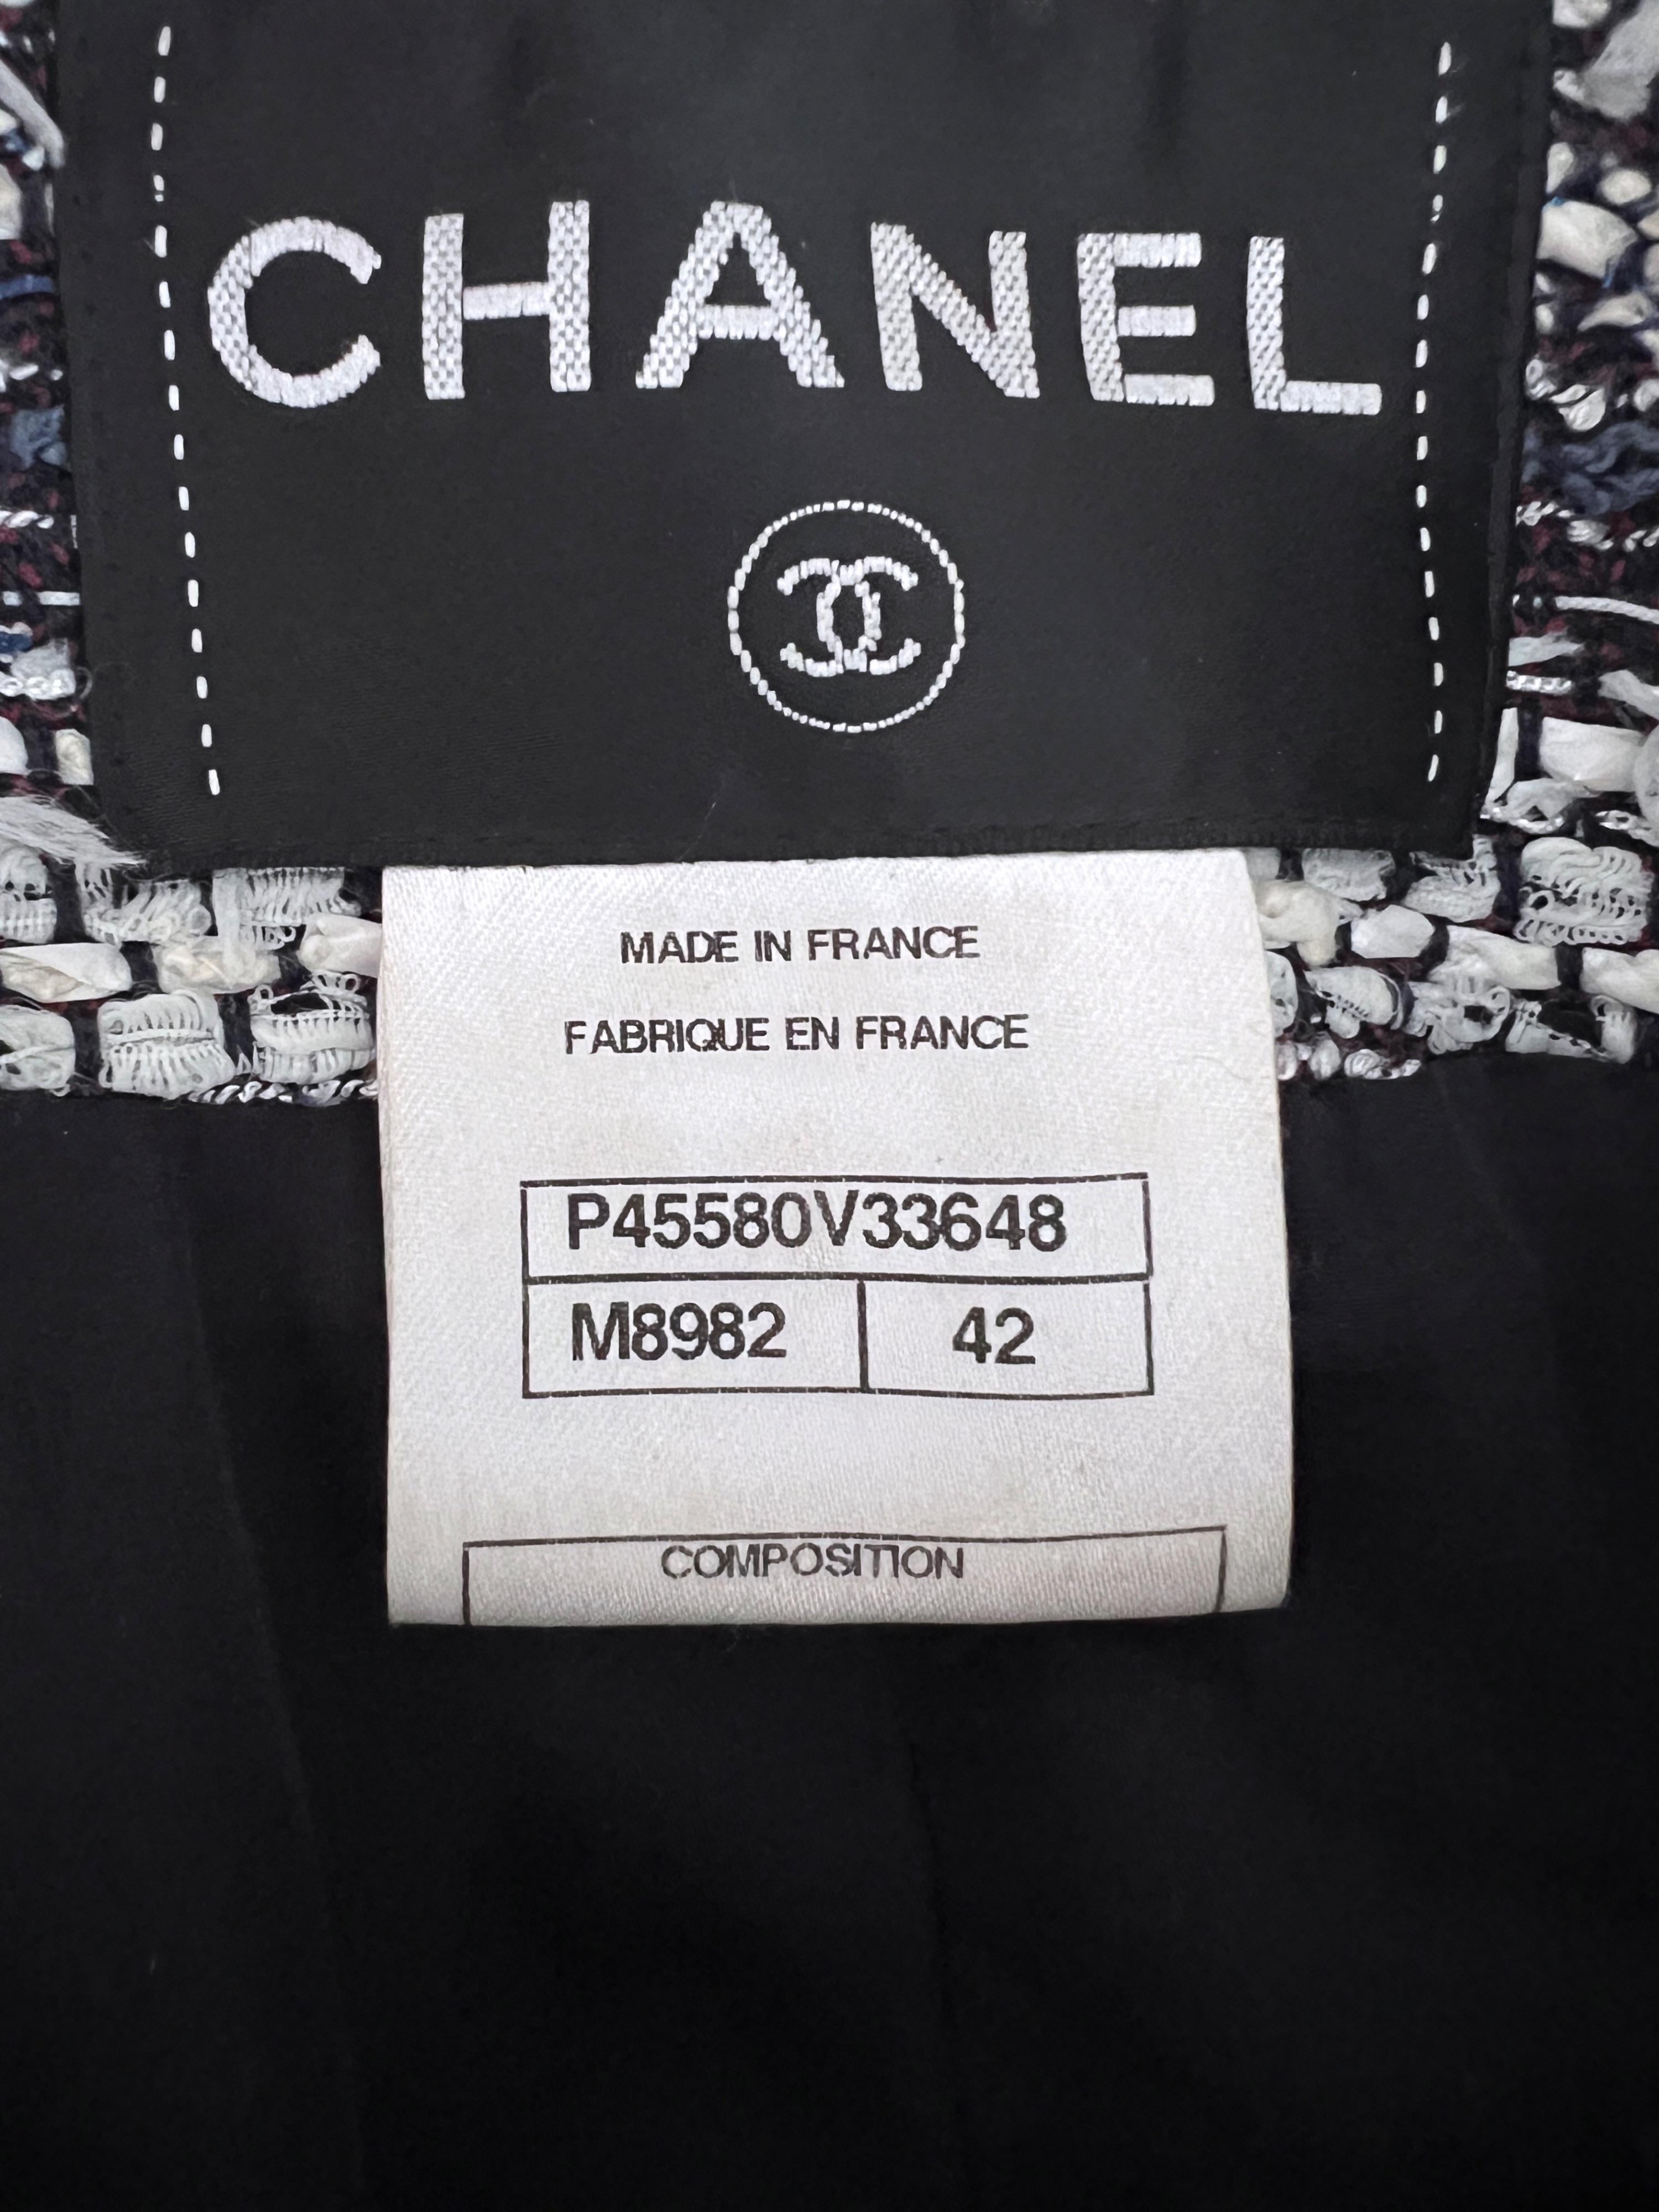 Chanel Singapore Collection Ribbon Tweed Jacket  7